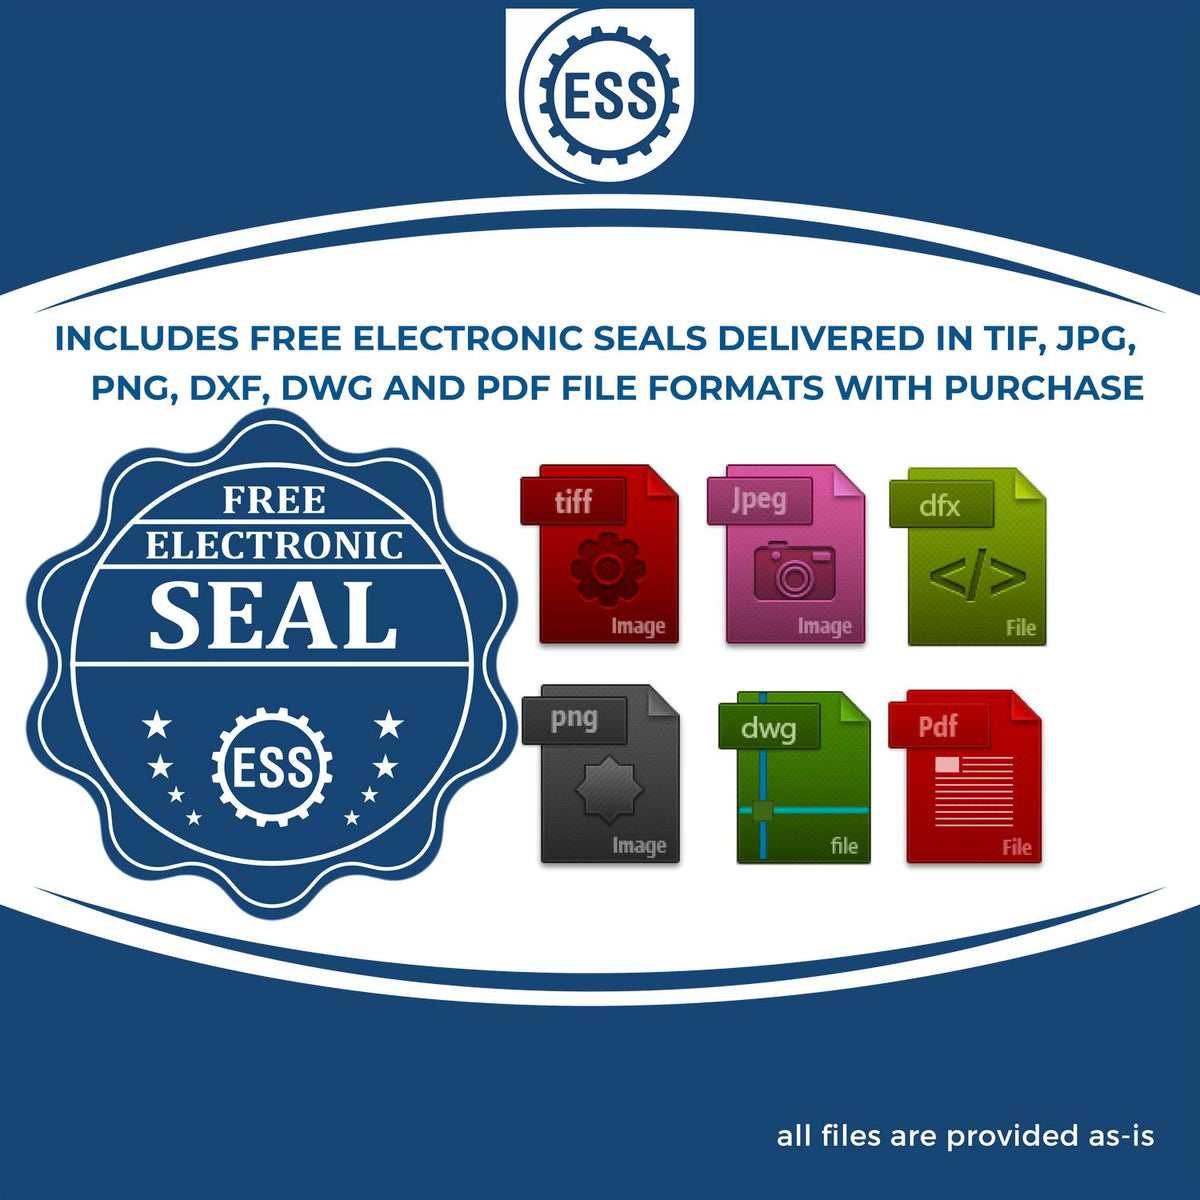 An infographic for the free electronic seal for the Arkansas Geologist Desk Seal illustrating the different file type icons such as DXF, DWG, TIF, JPG and PNG.